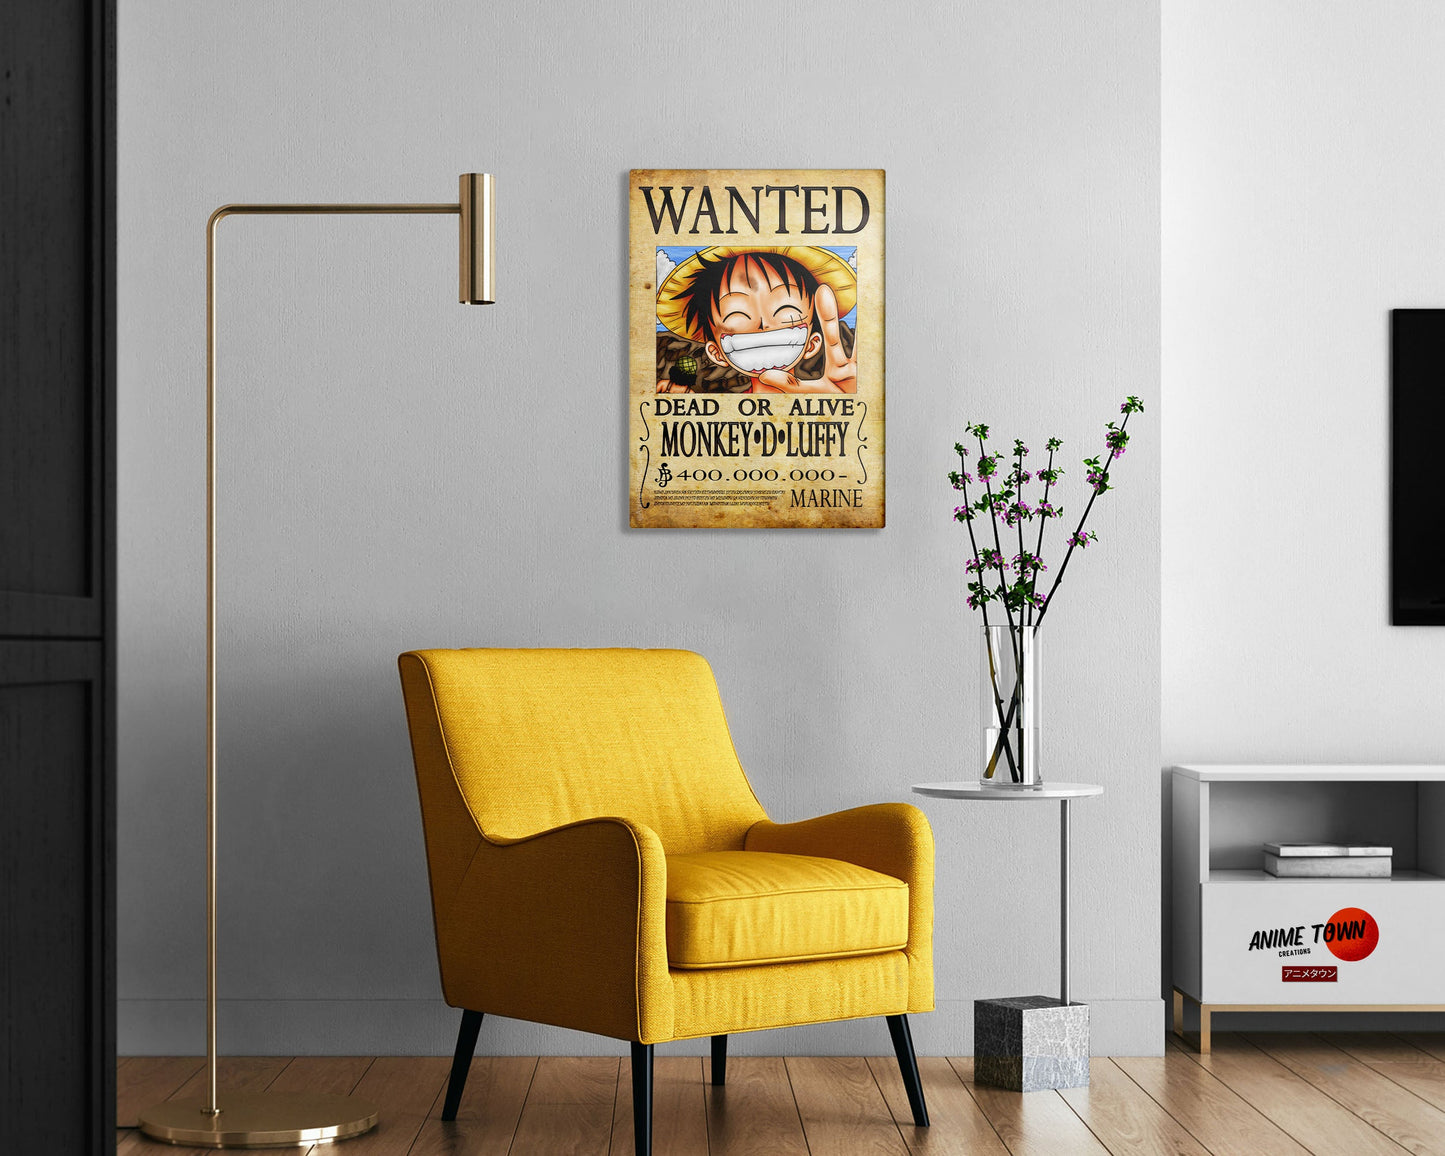 Anime Town Creations Metal Poster One Piece Luffy Wanted Poster 5" x 7" Home Goods - Anime One Piece Metal Poster